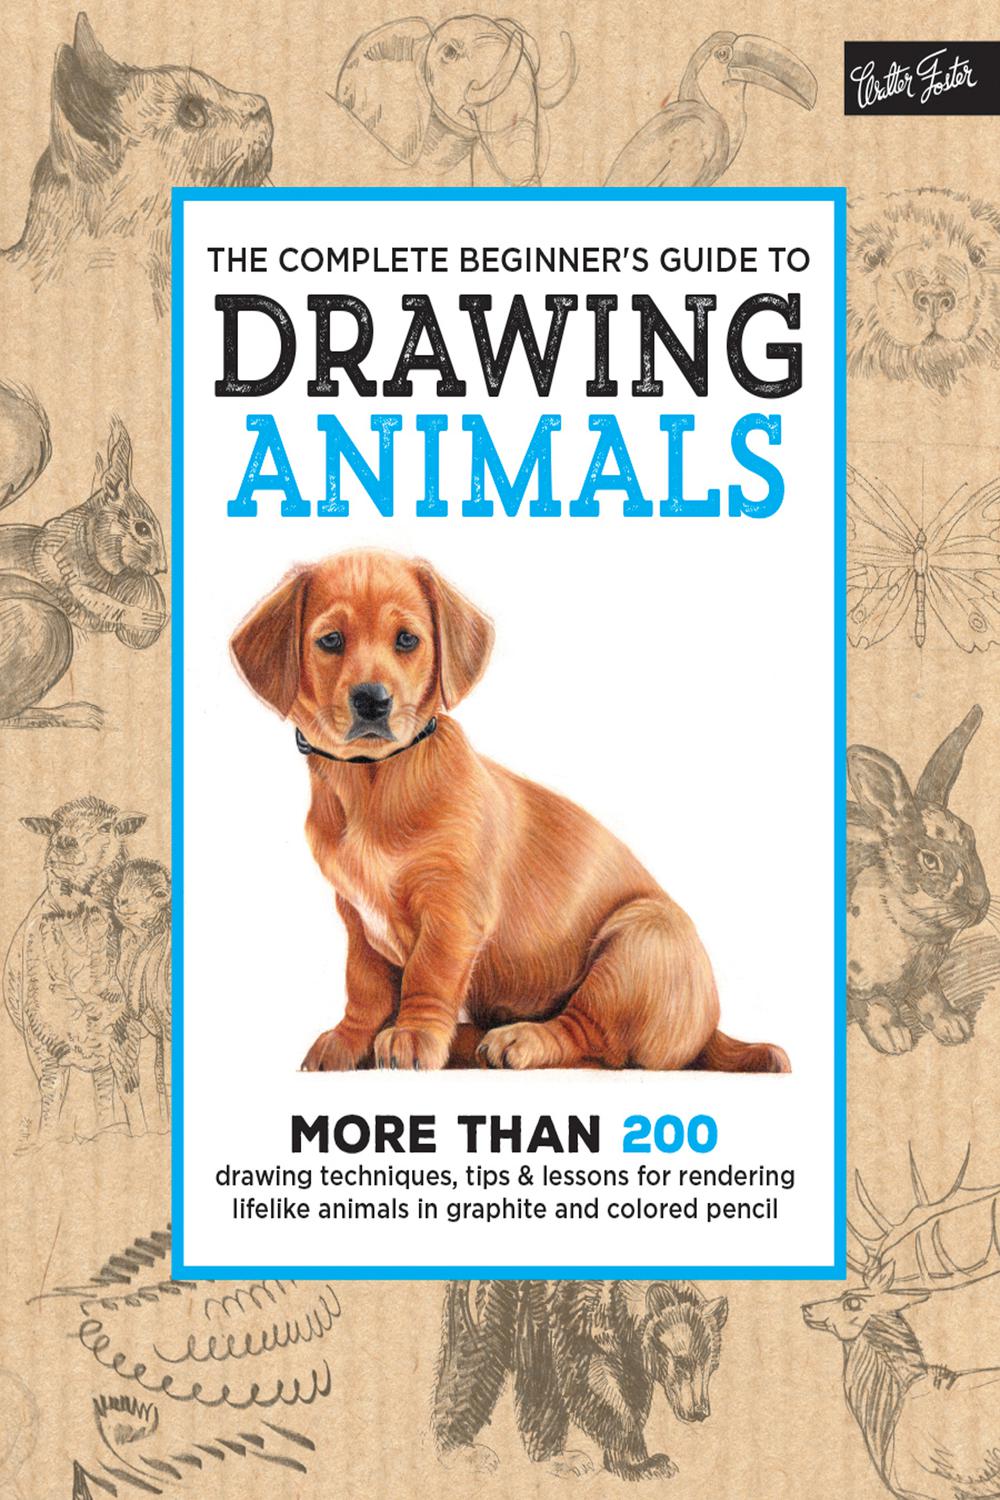 PDF] The Complete Beginner's Guide to Drawing Animals by eBook | Perlego